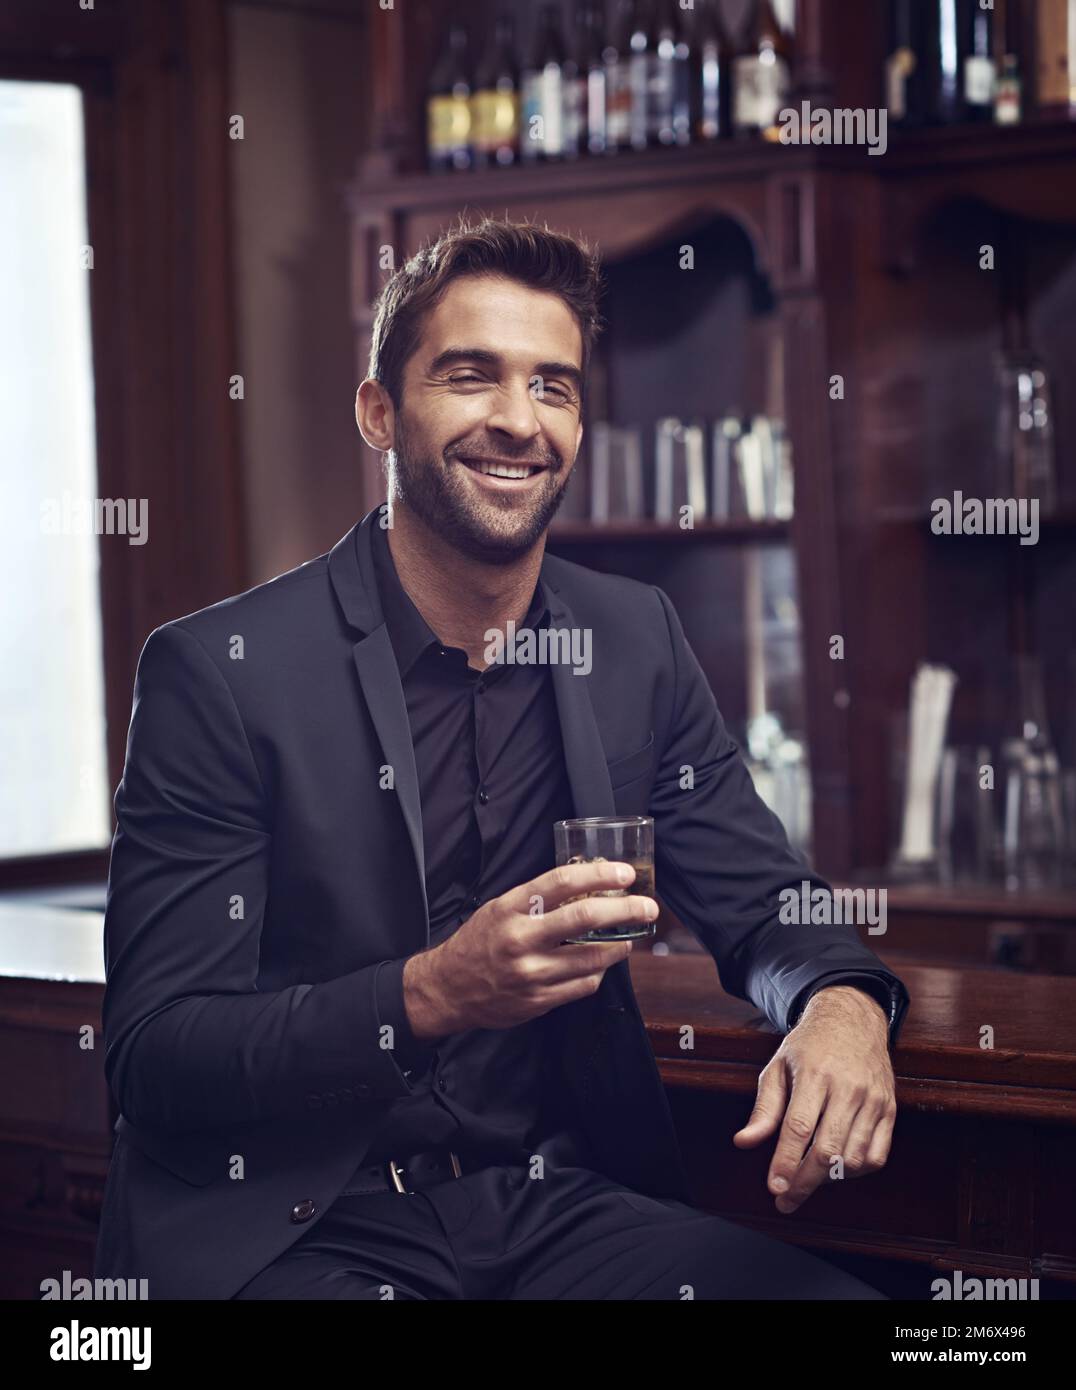 Stylishly confident. a handsome and confident young man. Stock Photo